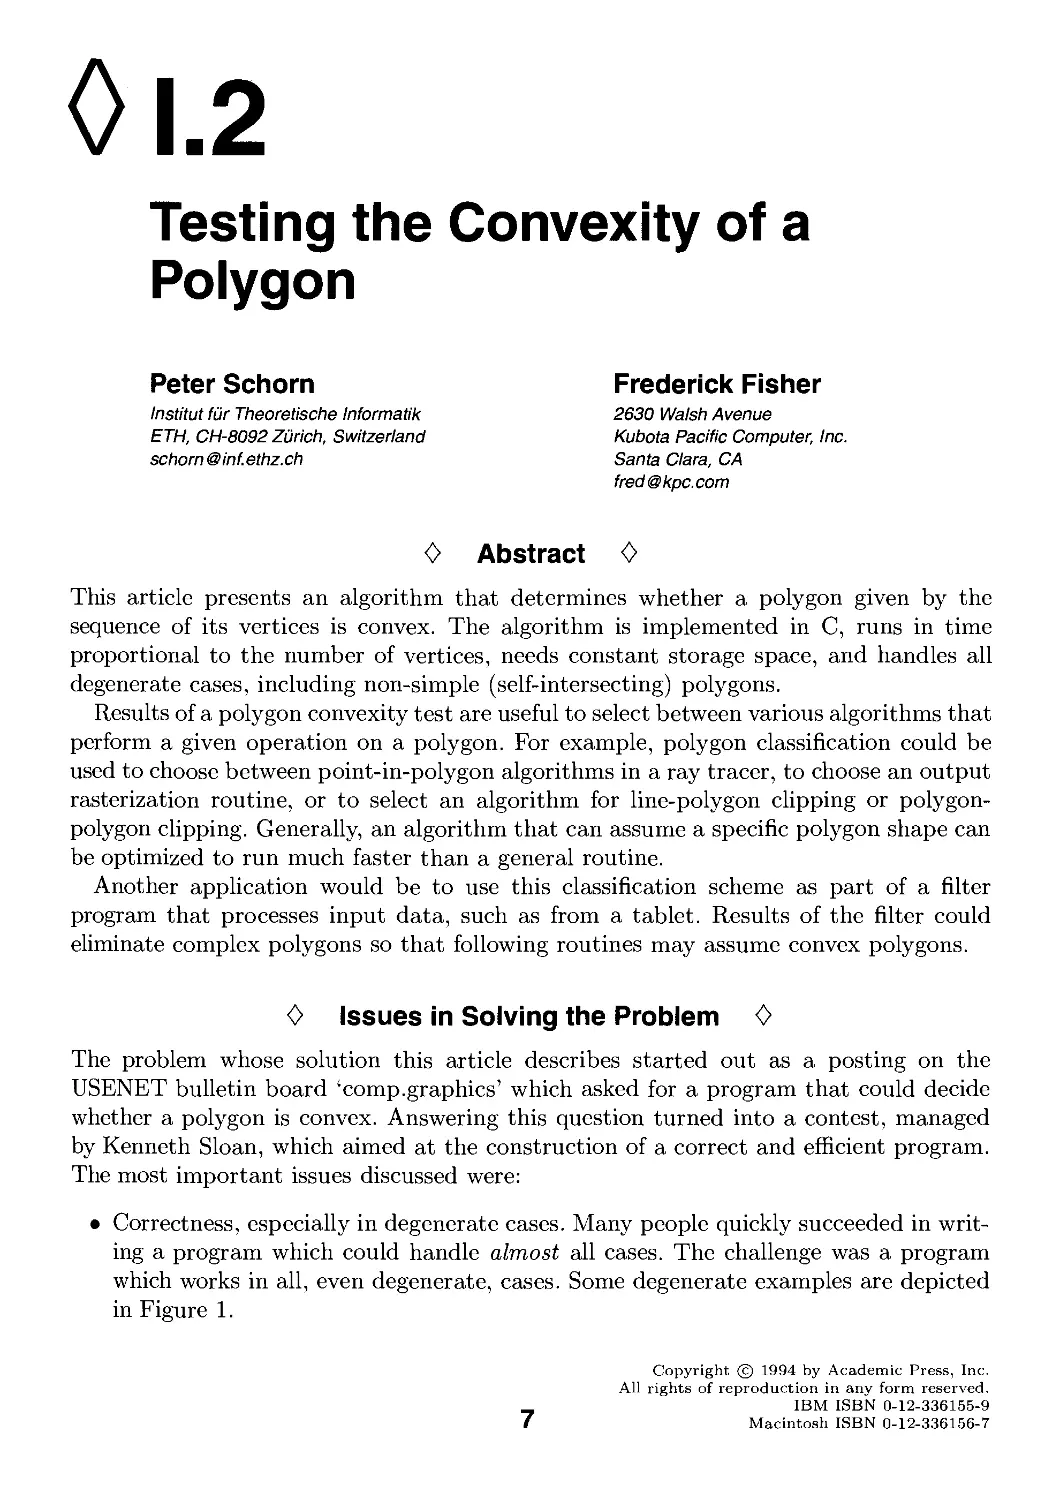 I.2. Testing the Convexity of a Polygon by Peter Schorn and Frederick Fisher